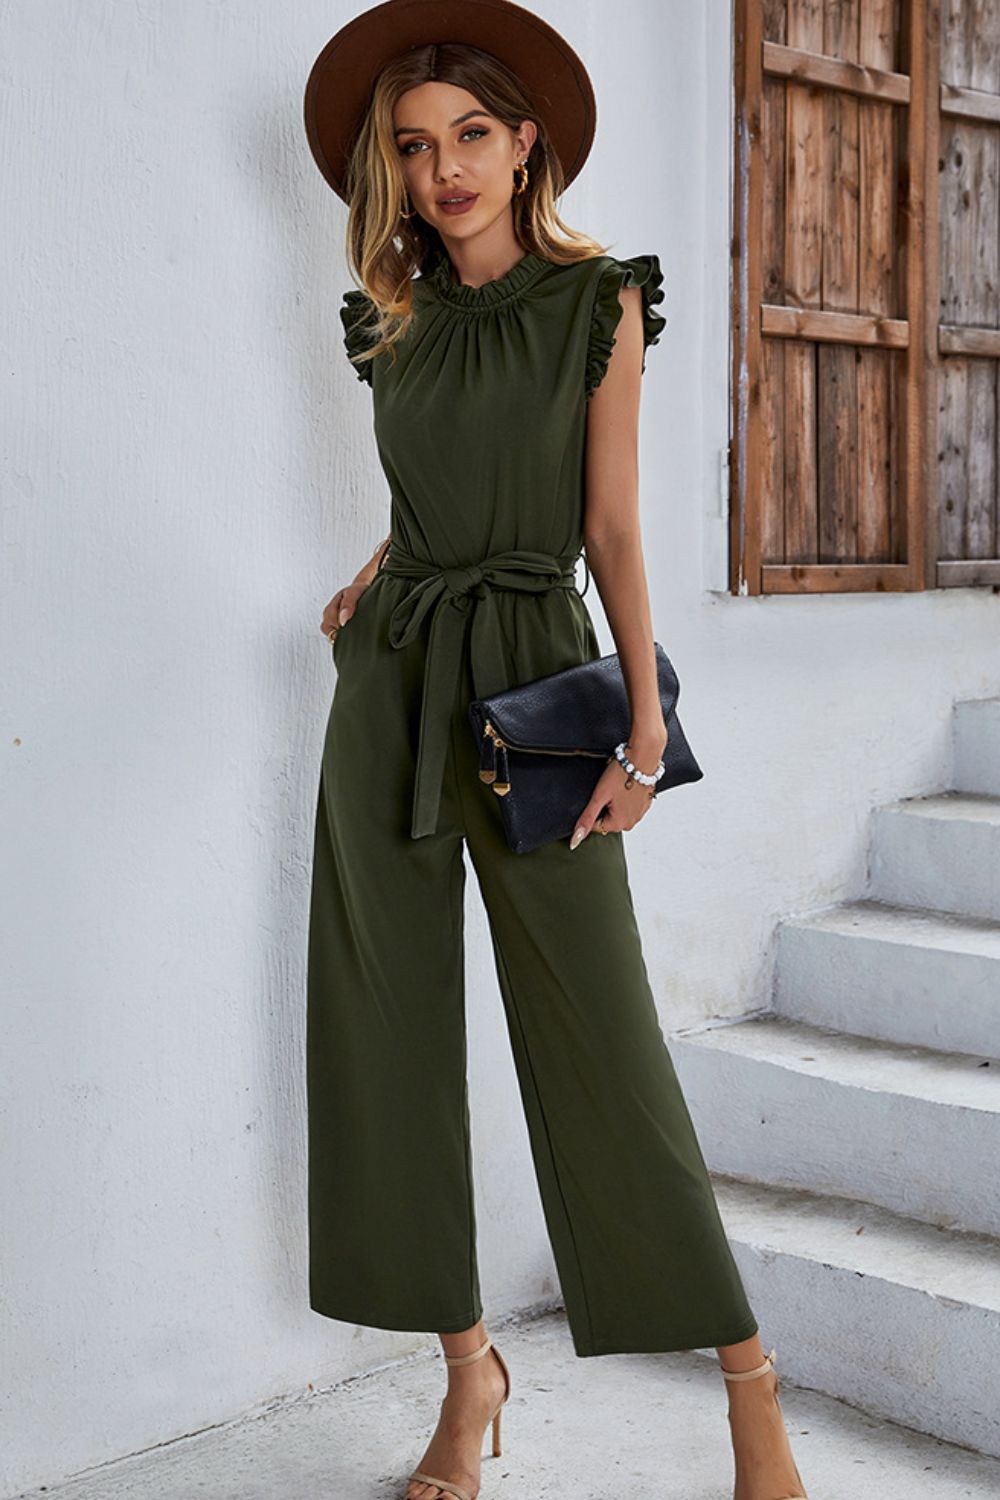 Butterfly Sleeve Tie Waist Jumpsuit  Sunset and Swim Army Green S 